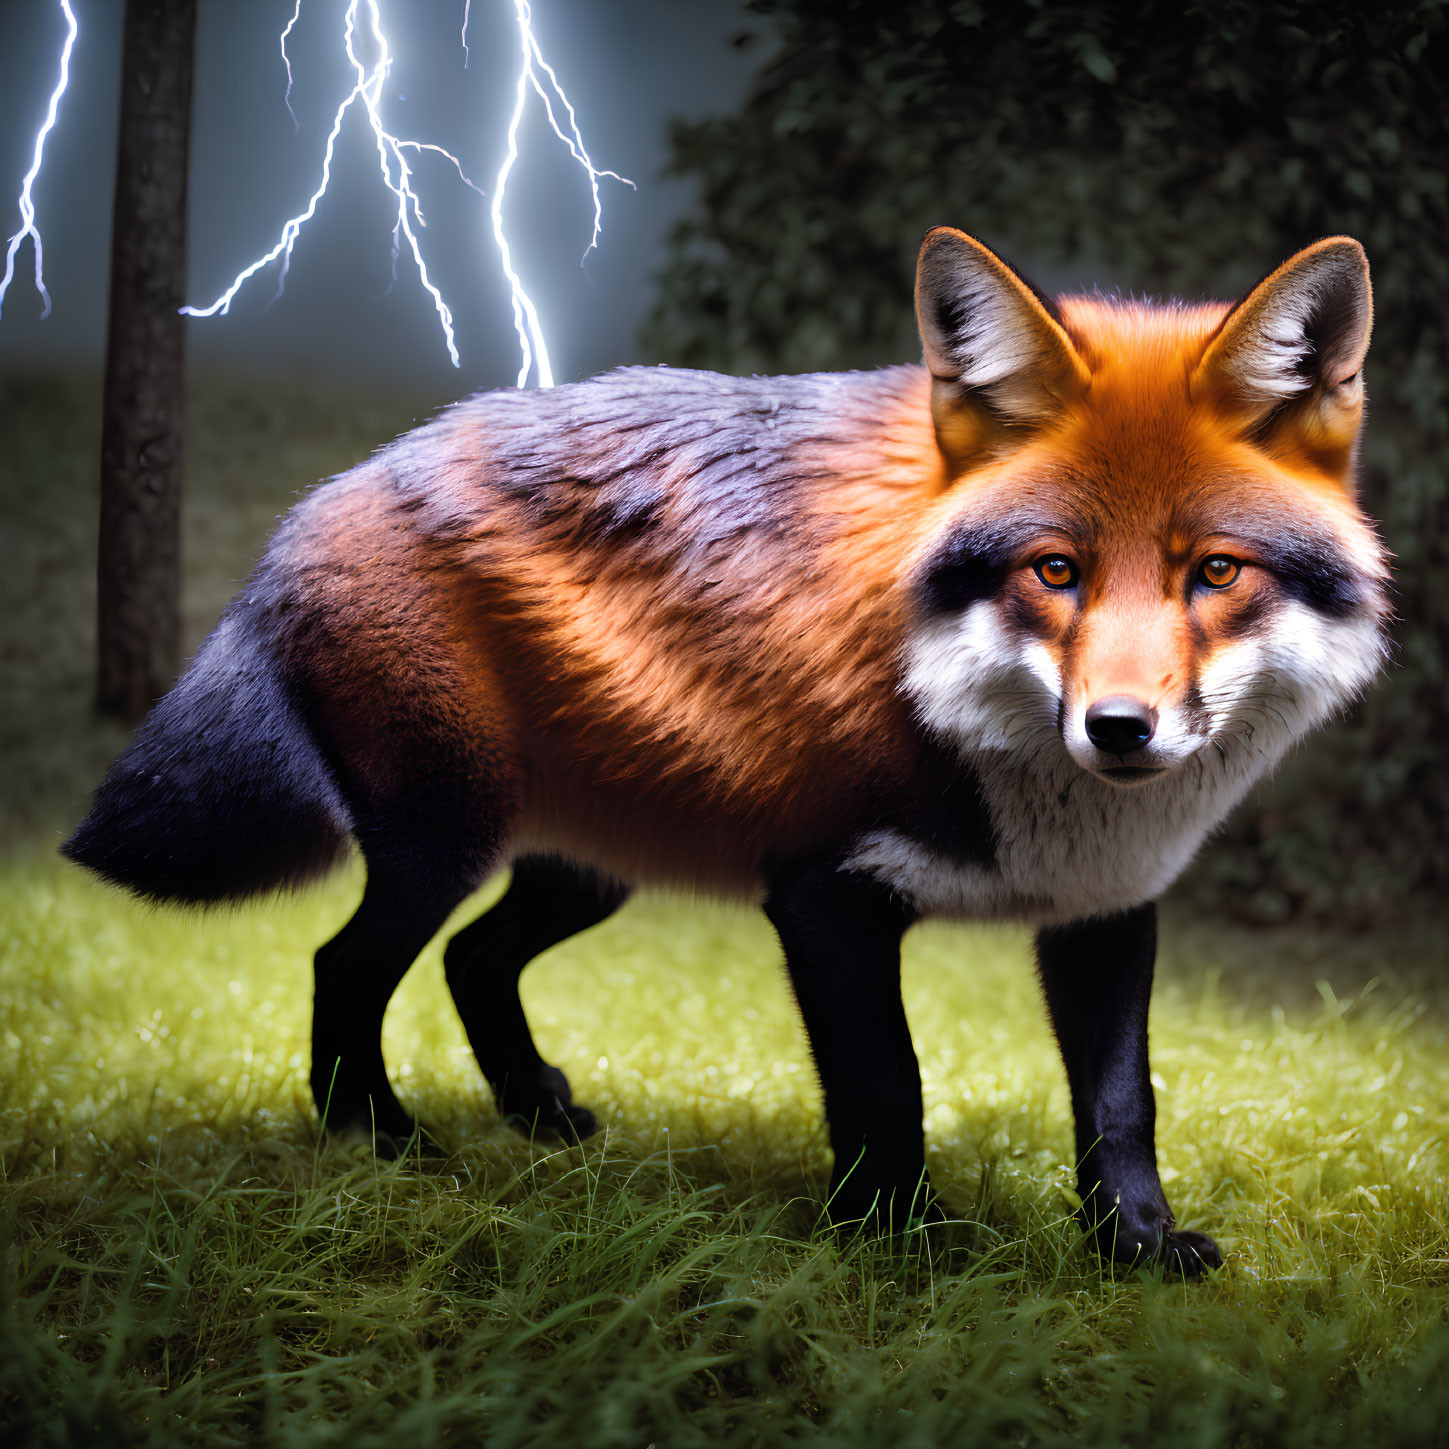 Red fox in grassy clearing with dramatic lightning in forest background